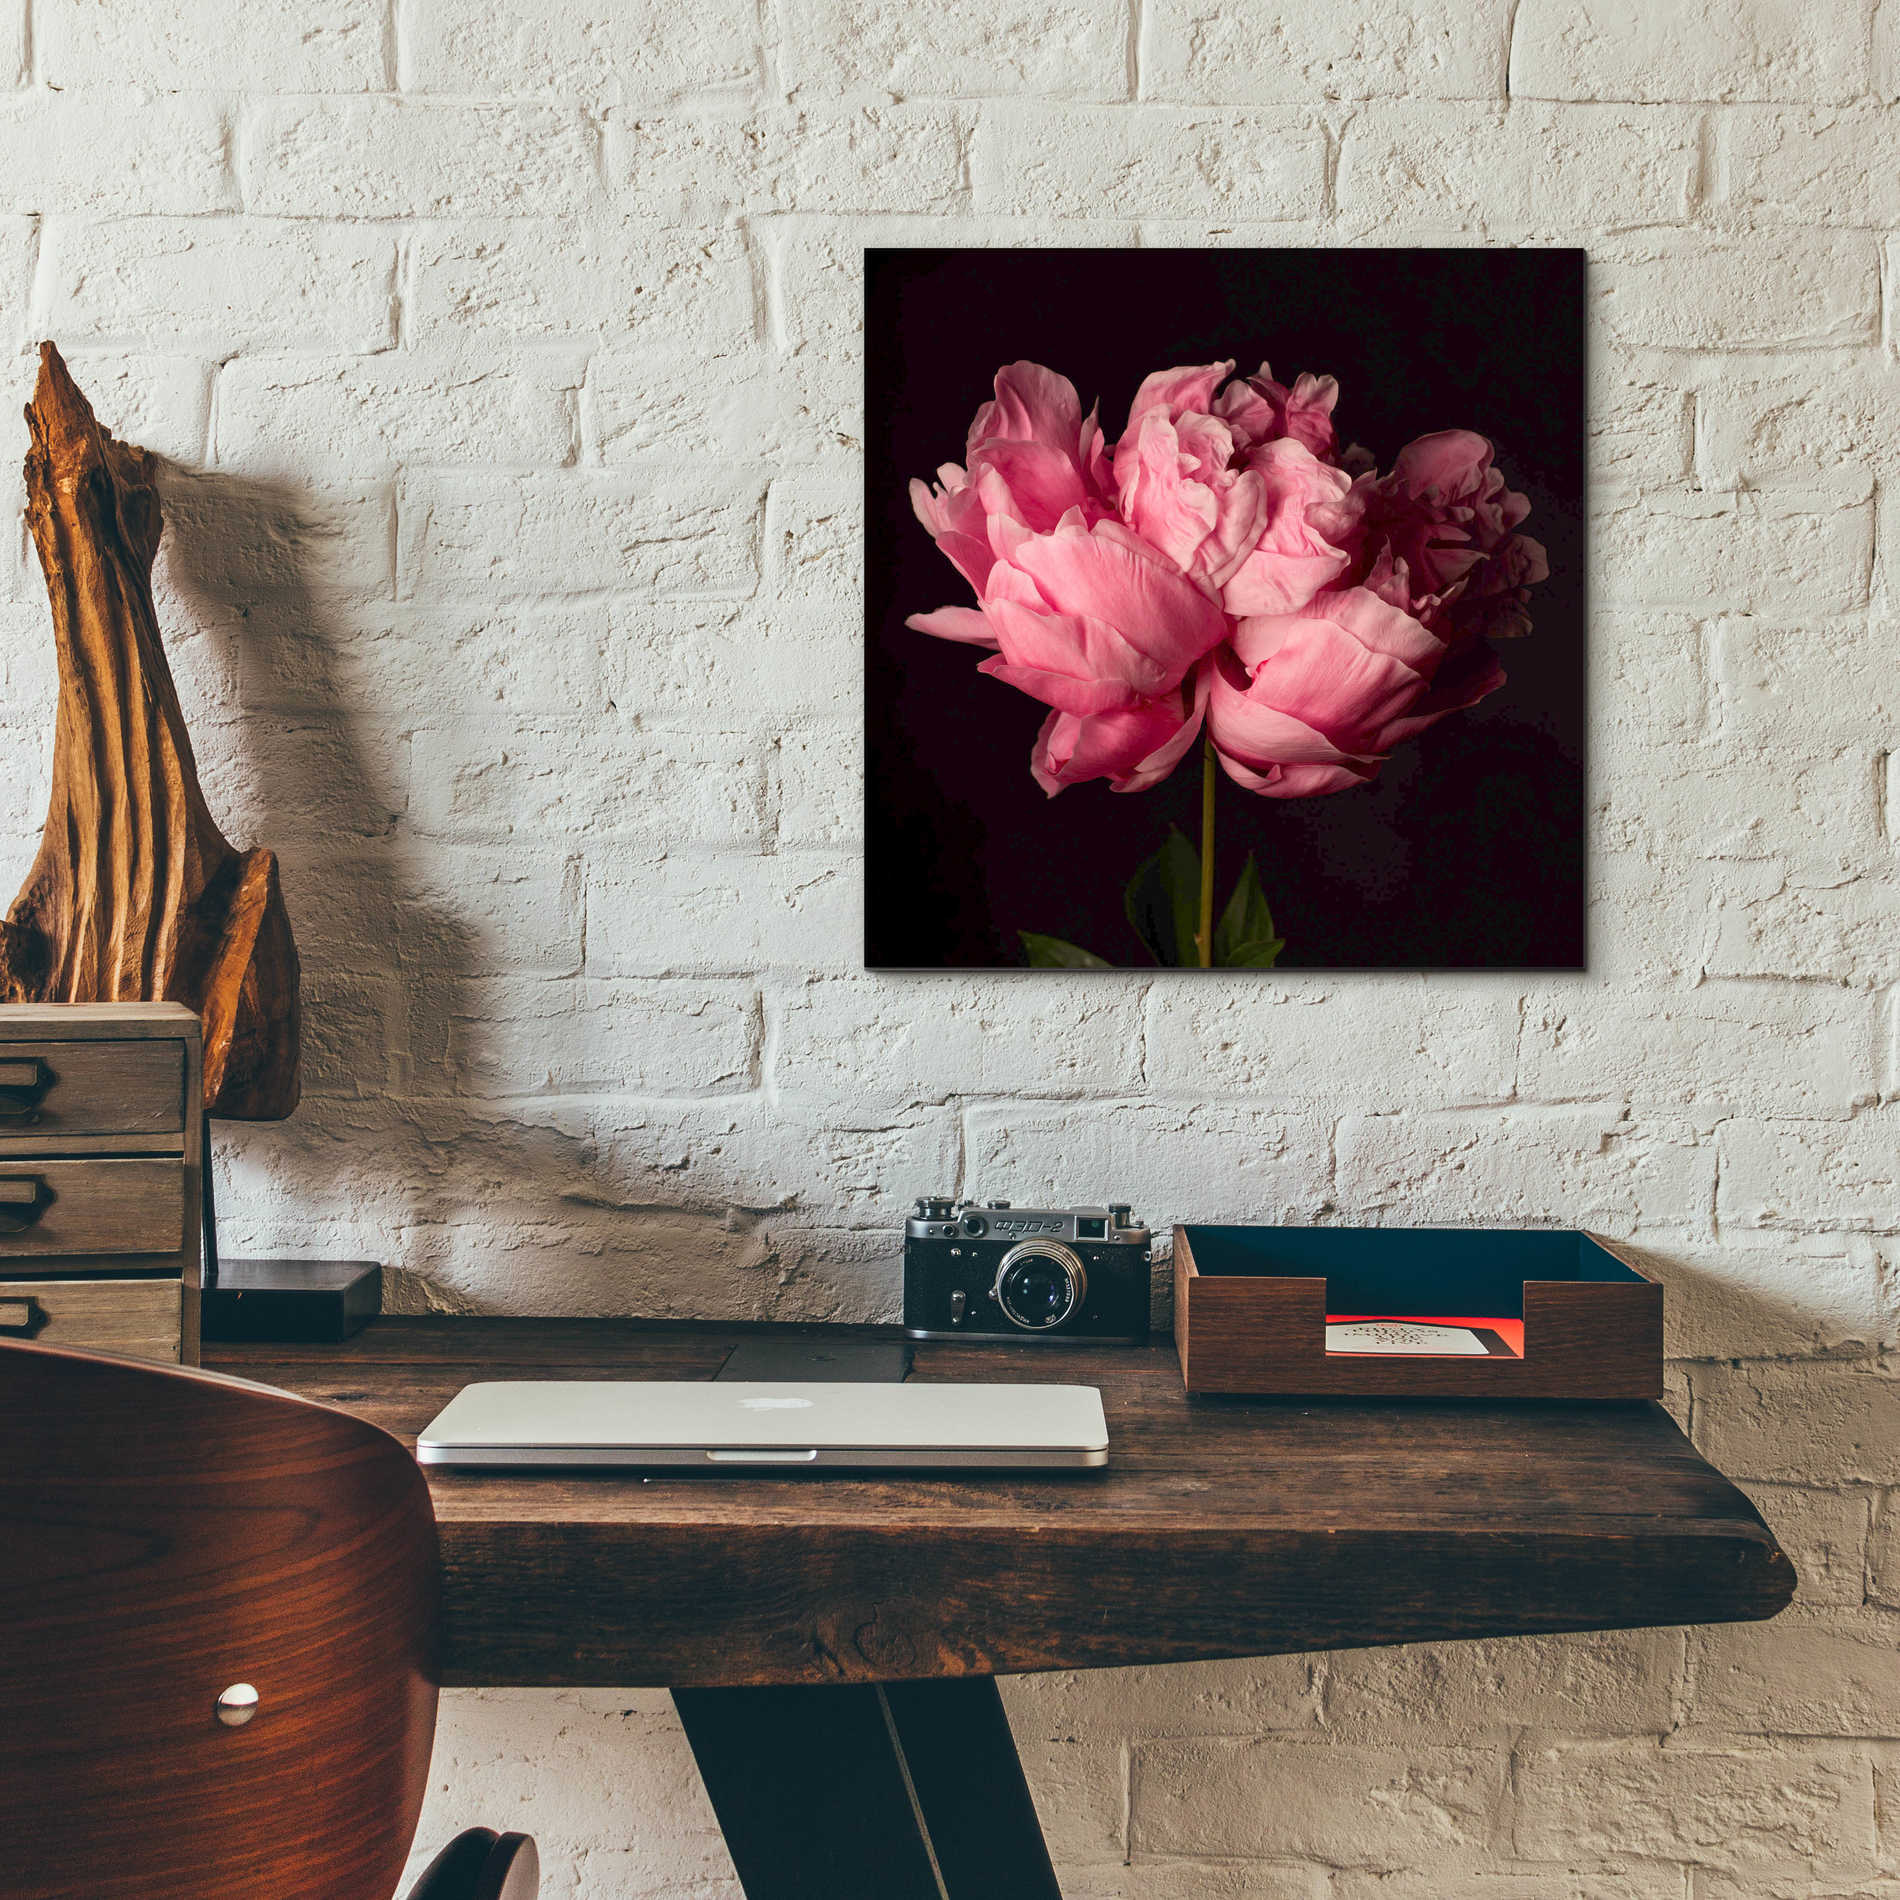 Epic Art 'Perfect Peony' by Leah McLean Acrylic Glass Wall Art,12x12